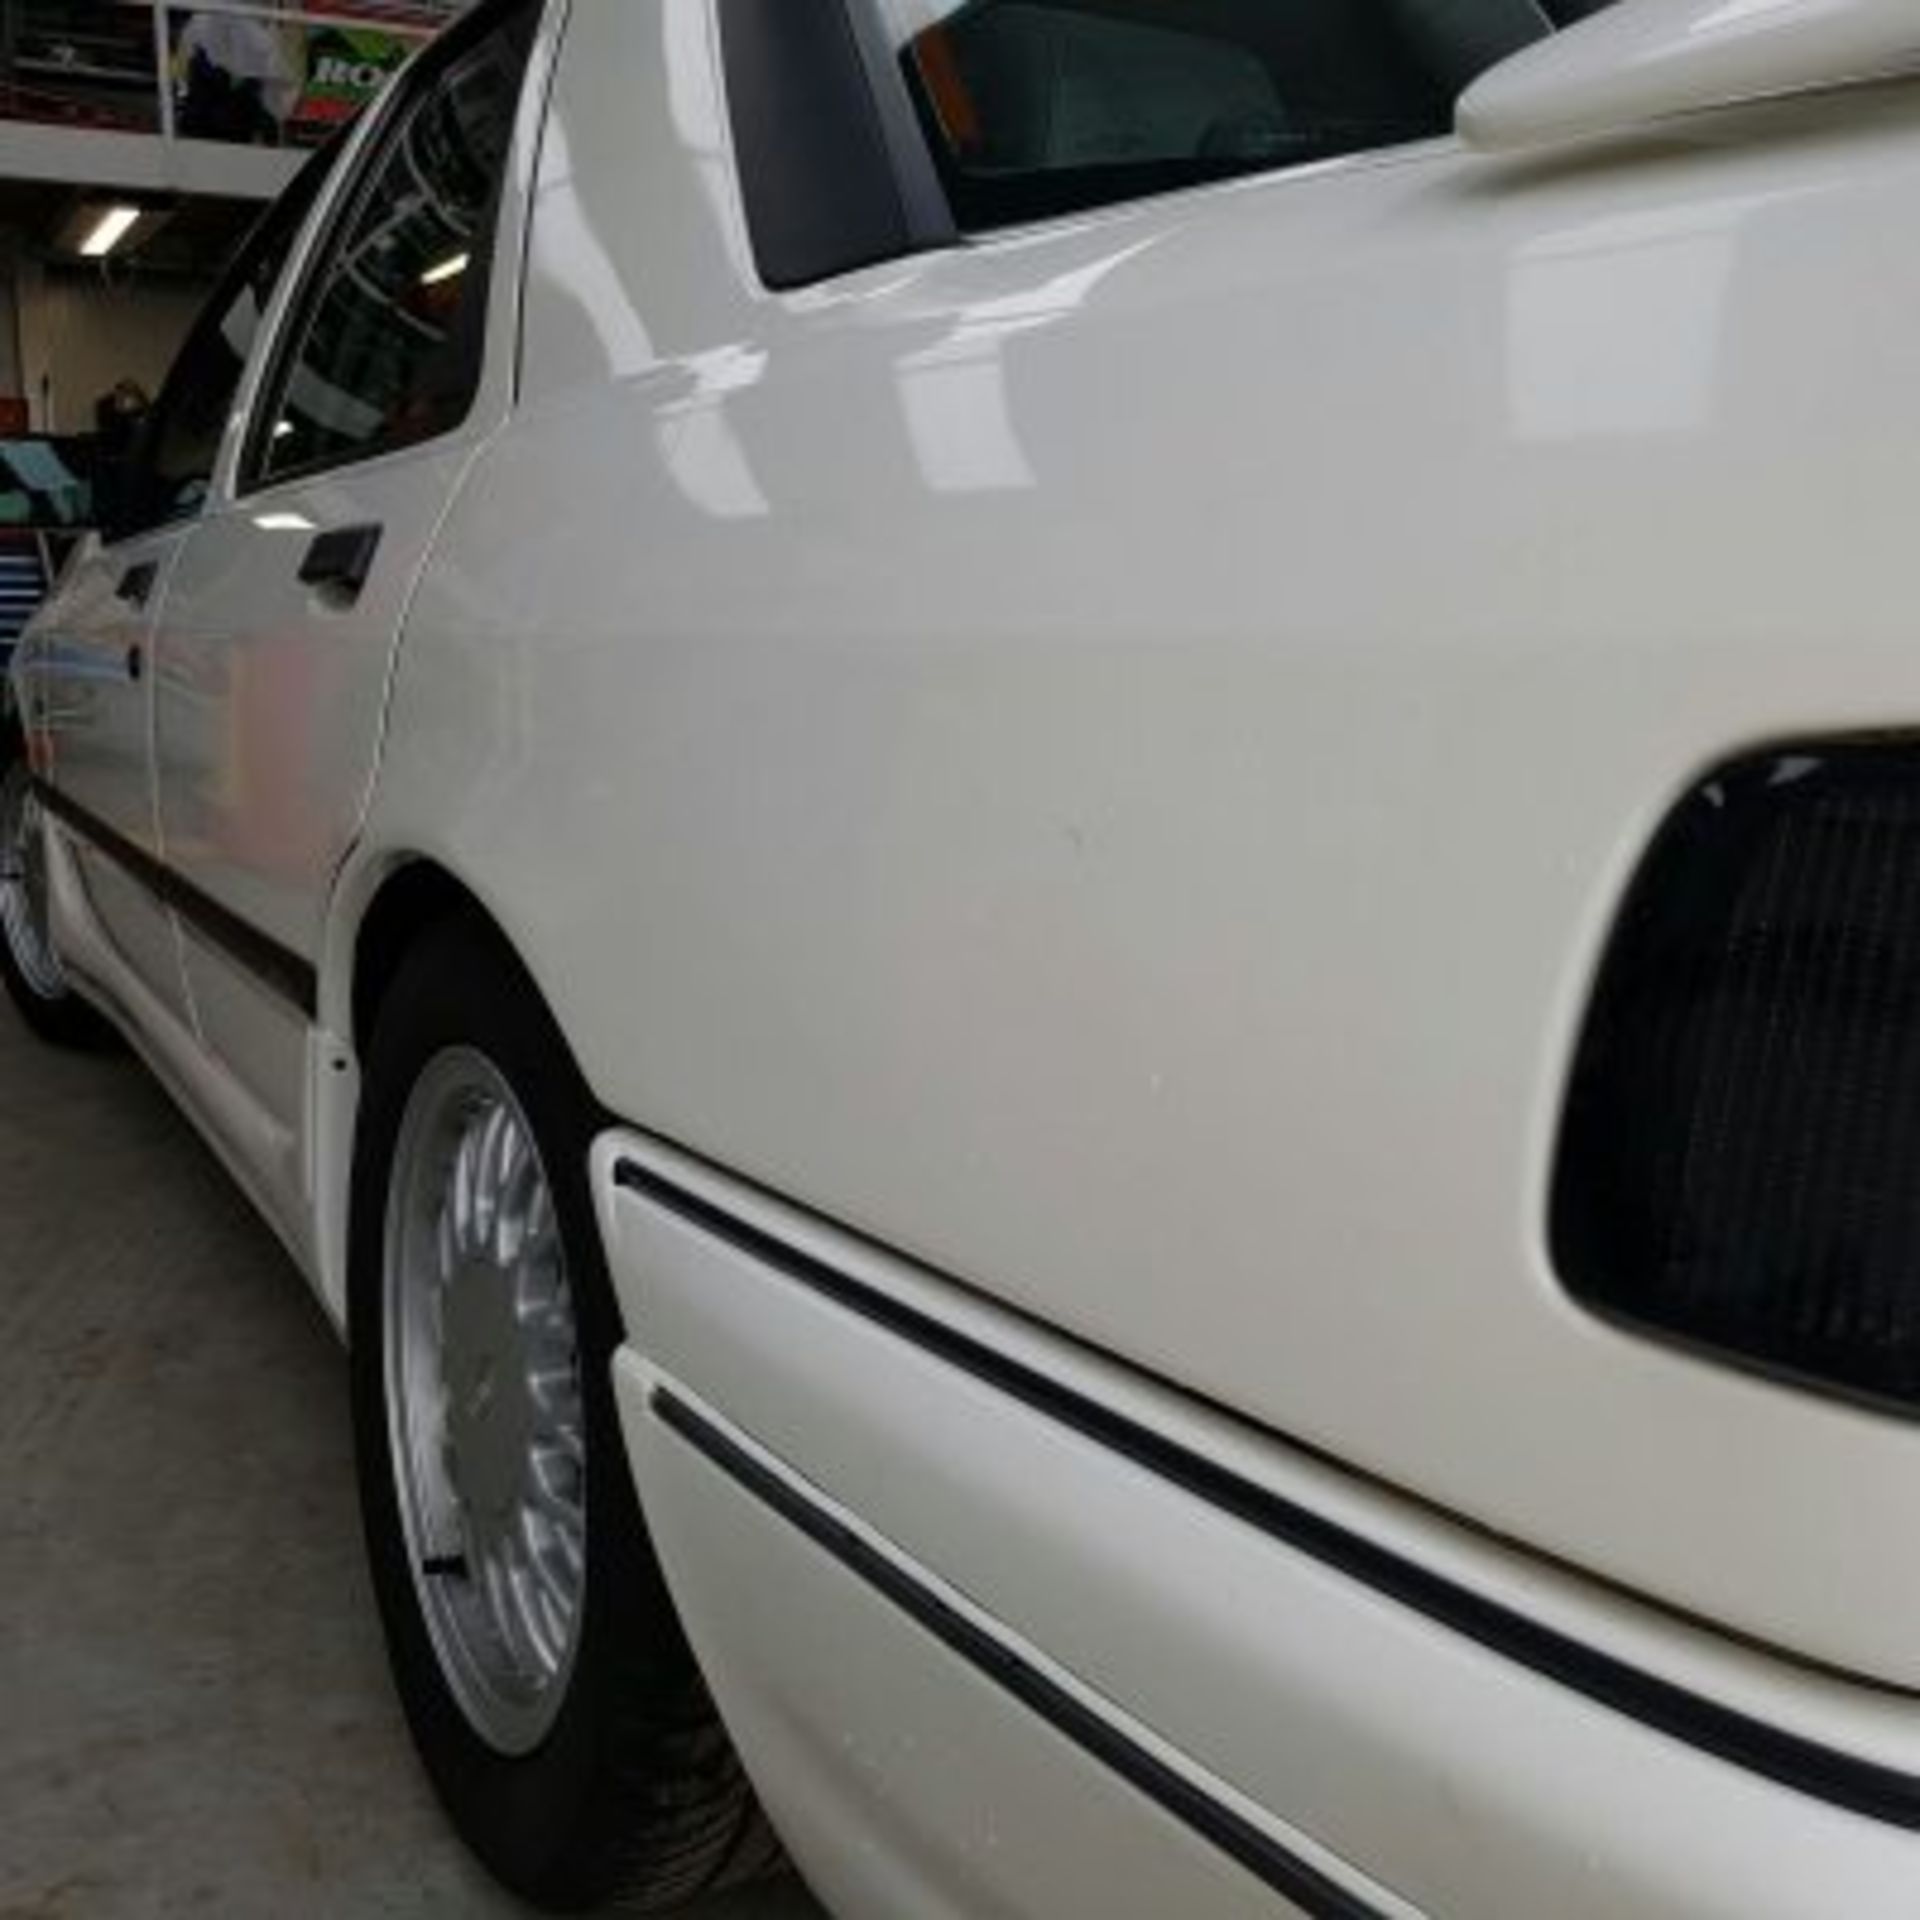 Ford Sierra Sapphire Cosworth 4×4 “Rouse Sport 304-R REPLICA” 1992 - The “Rouse Sport” Sierra - Image 3 of 12